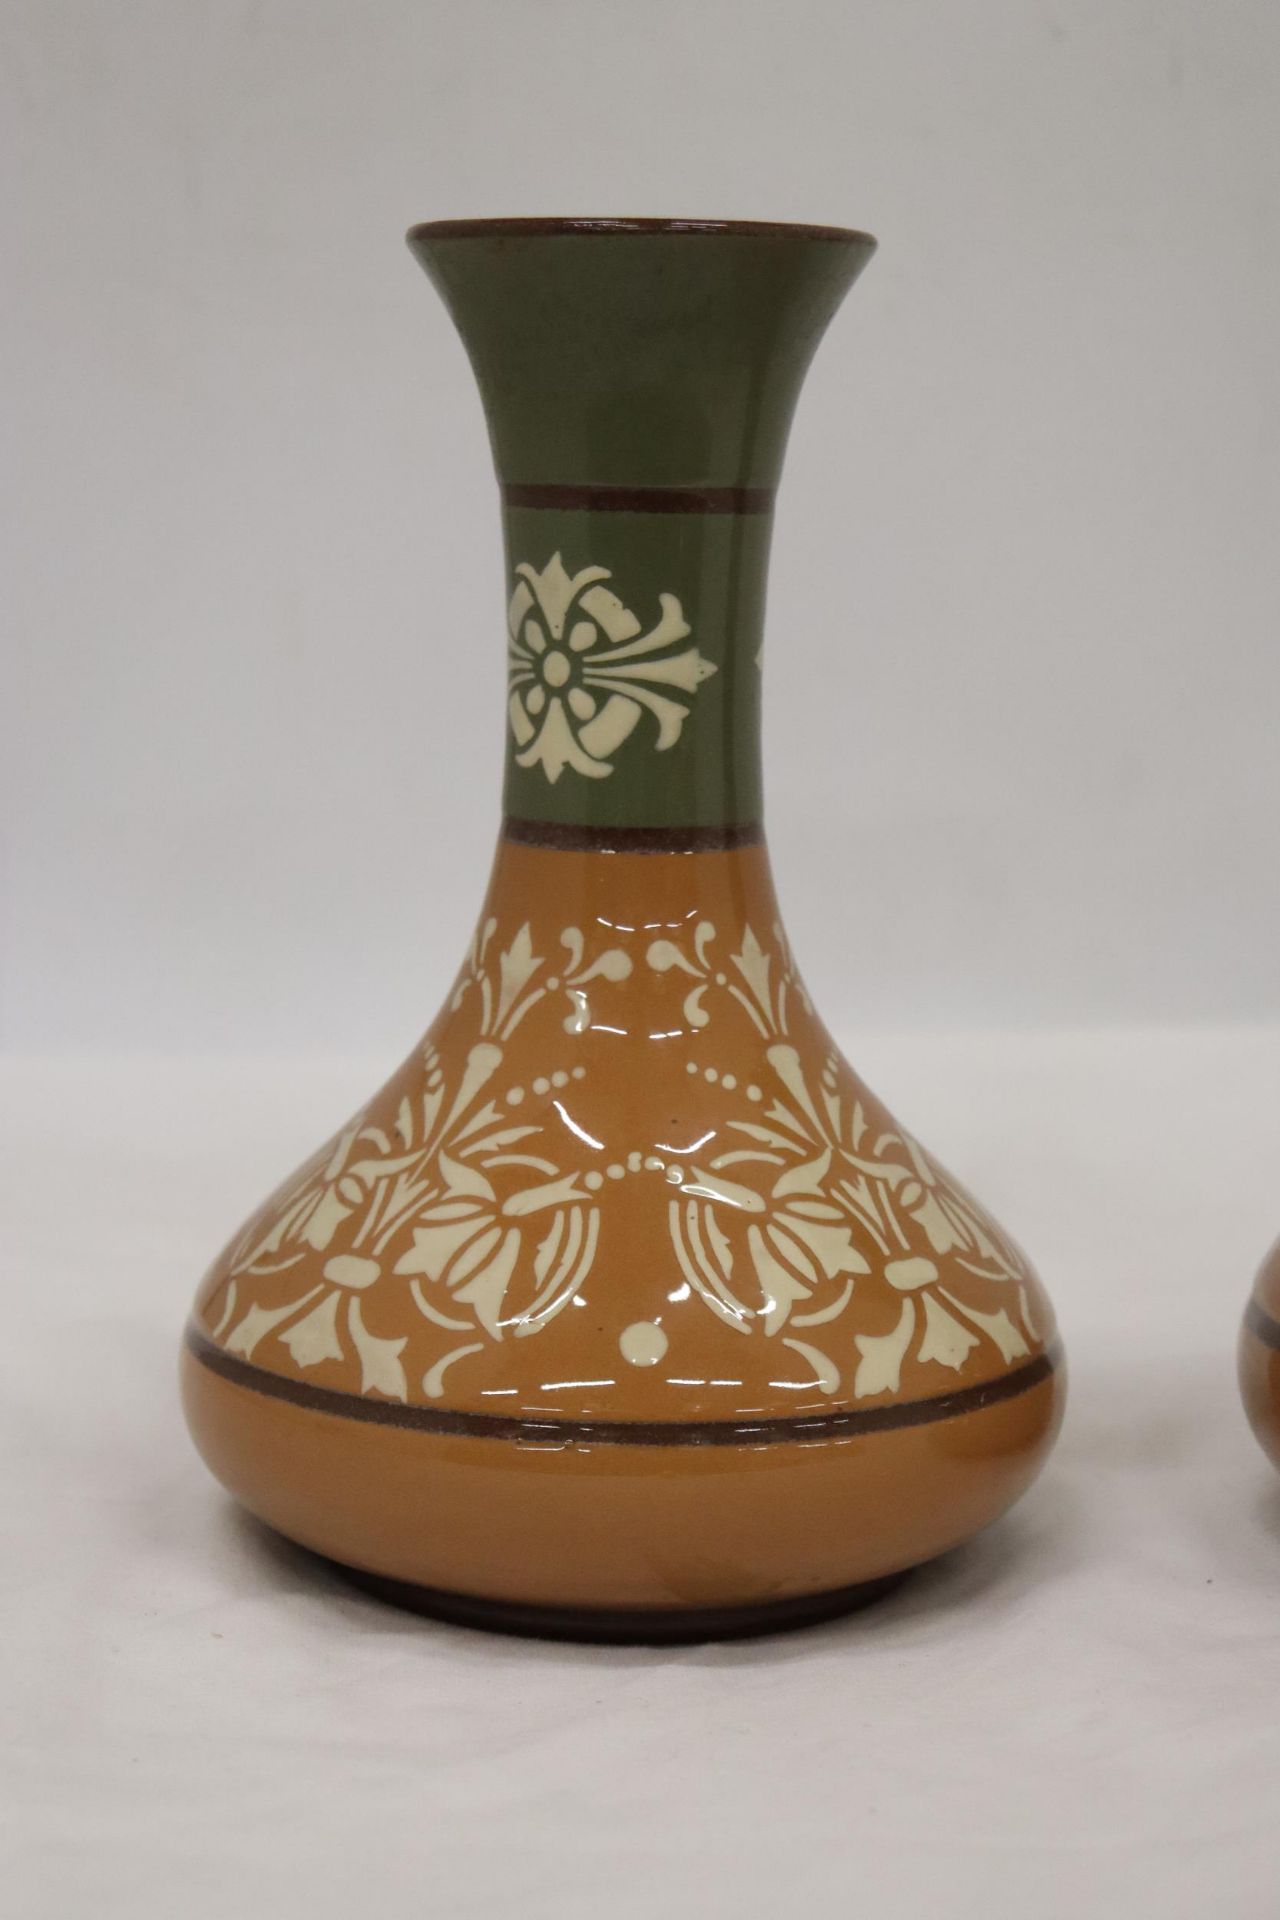 A PAIR OF LANGLEY LOVIQUE WARE ART POTTERY VASES - Image 4 of 4